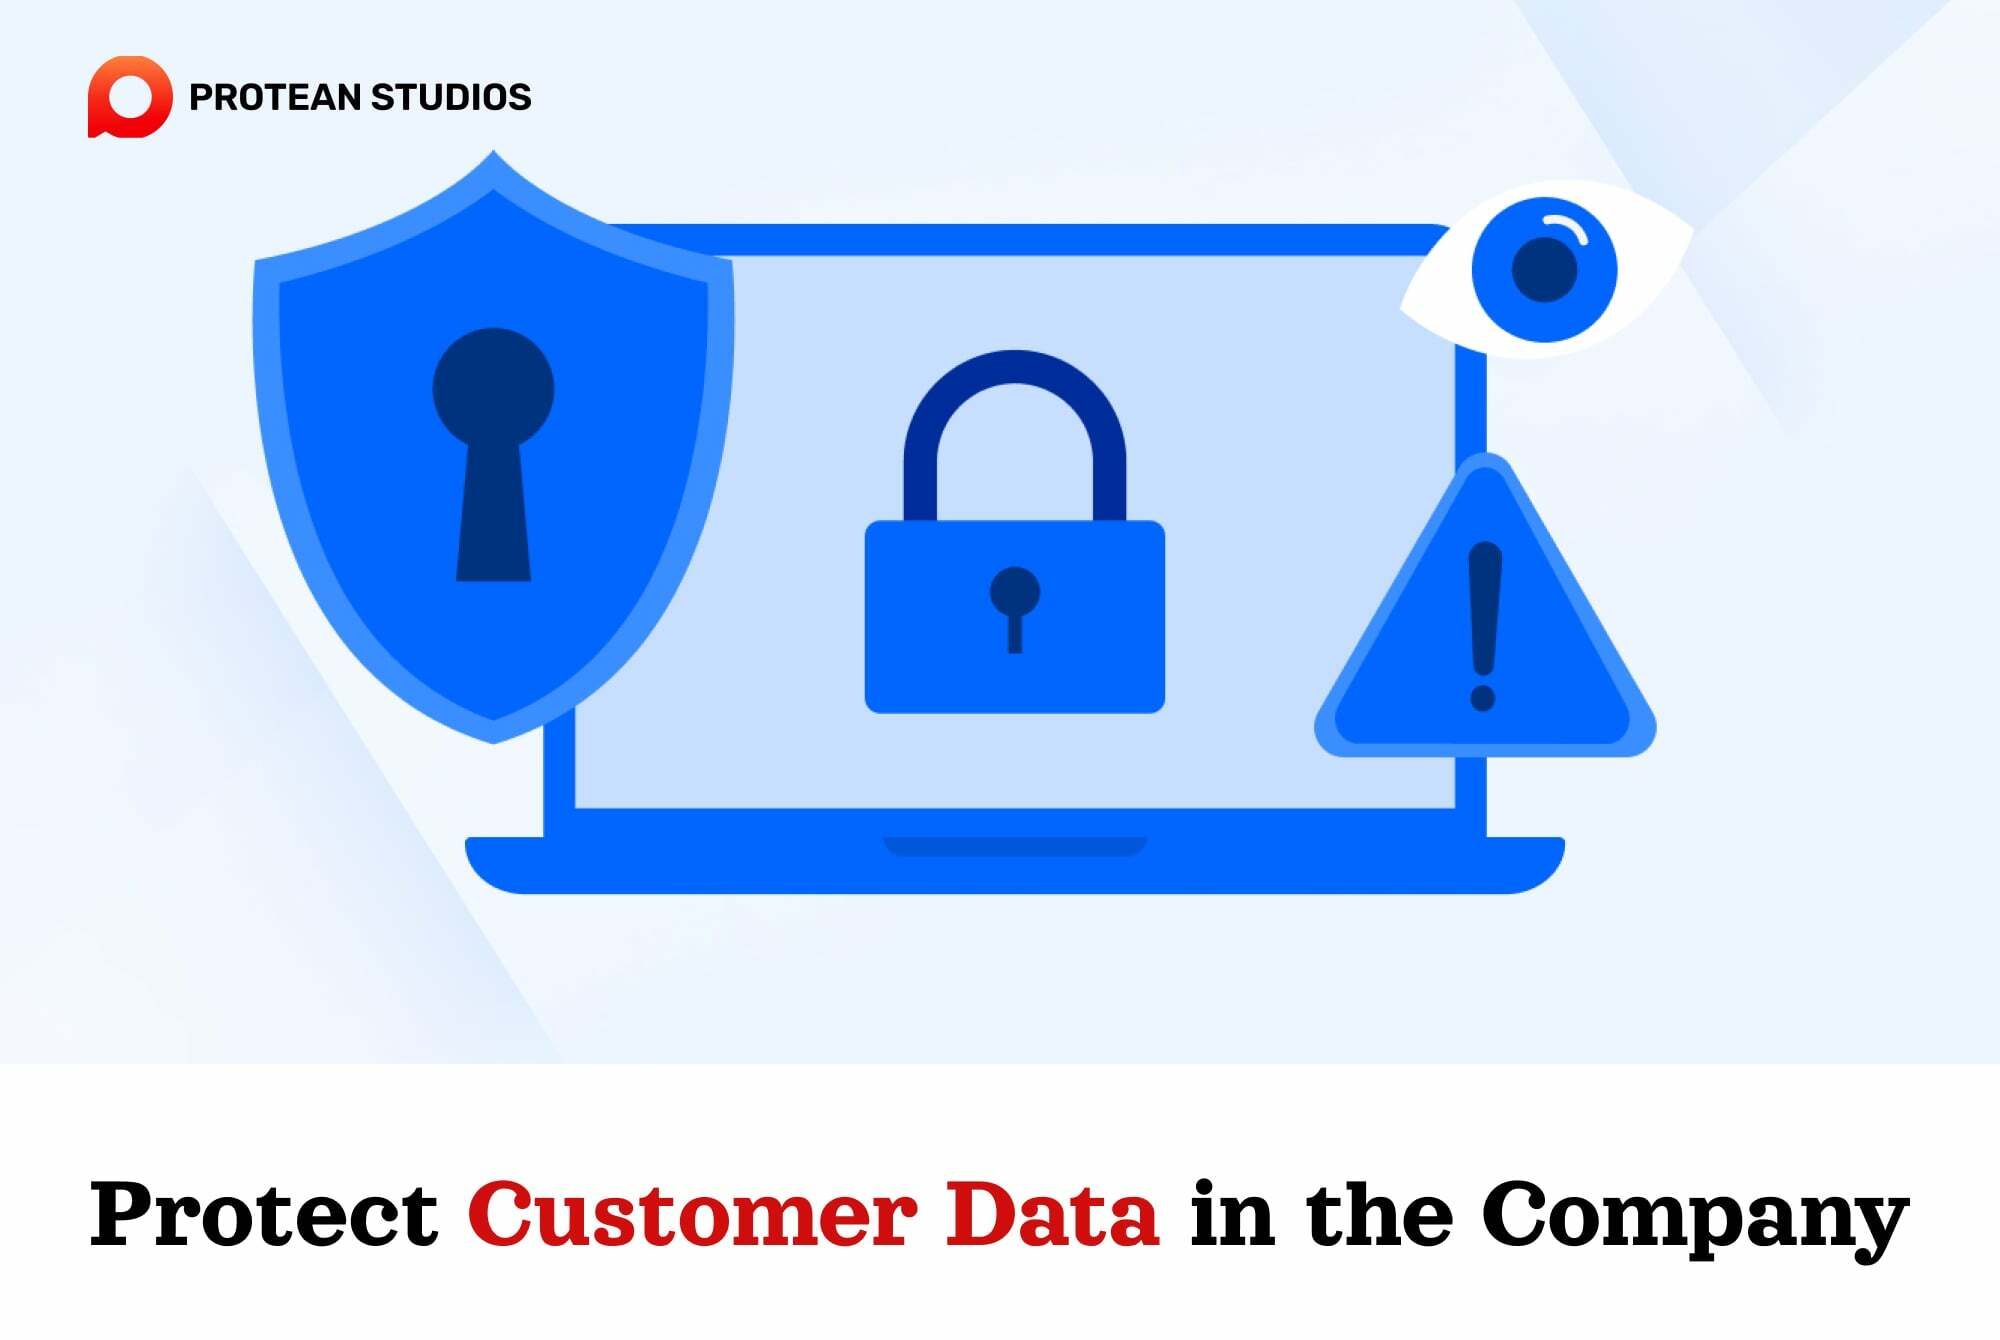 Customers care about data security